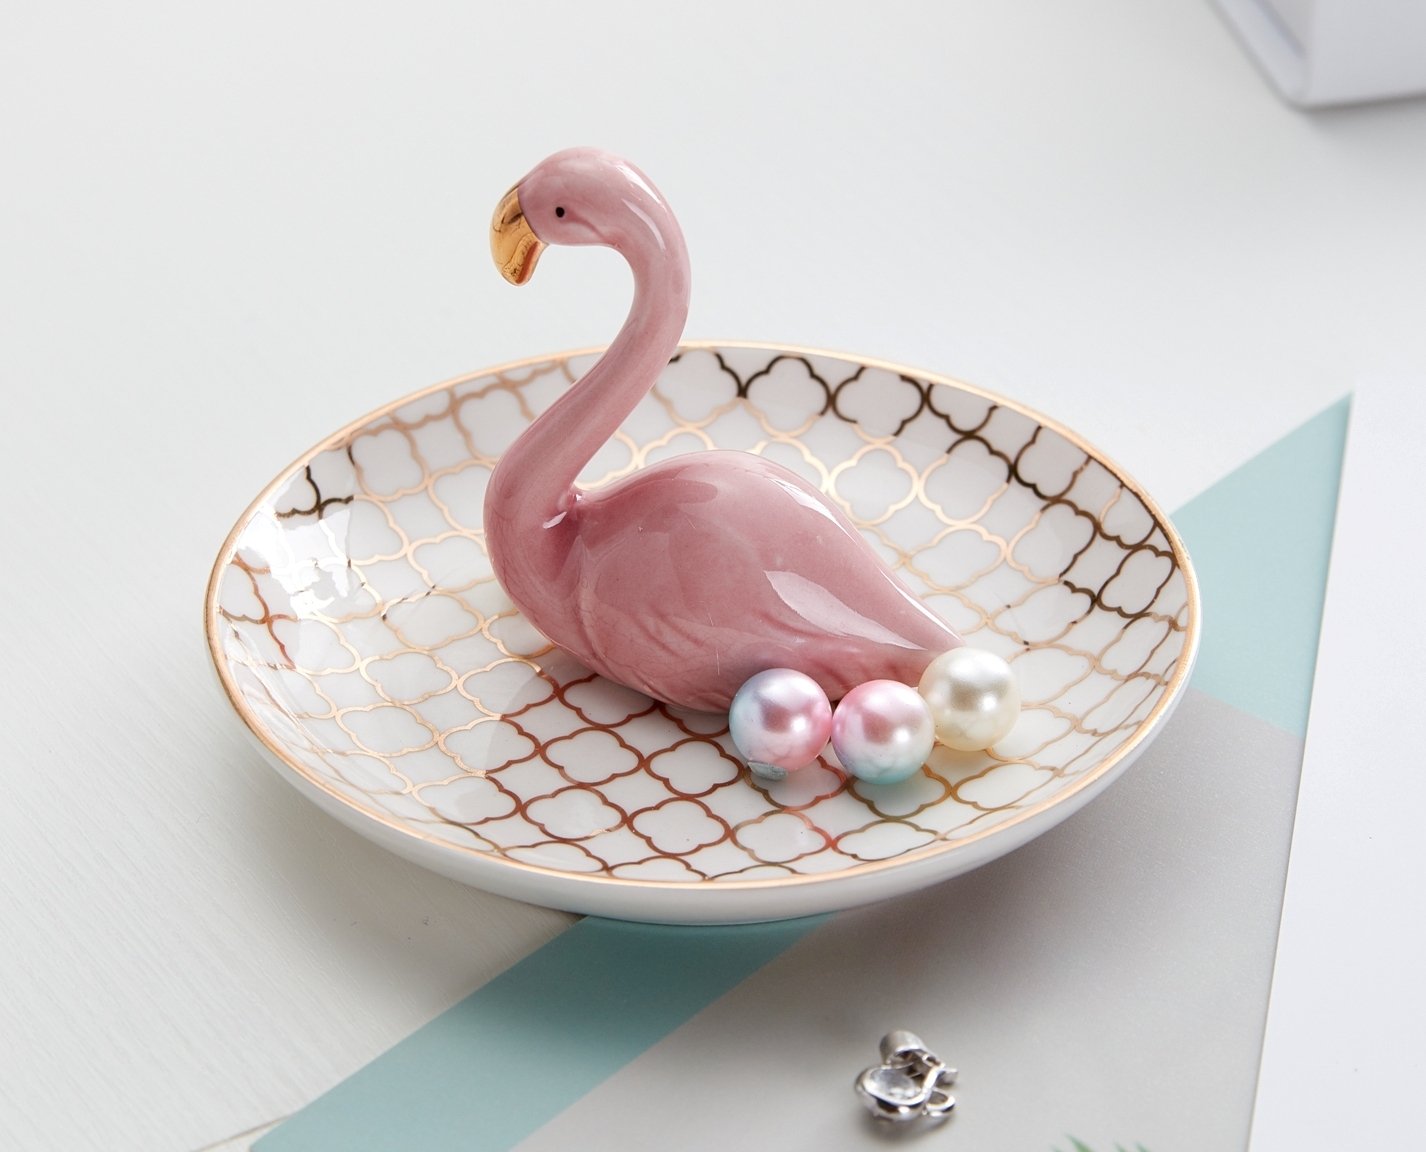 Luxury Porcelain Adorable Flamingos Jewelry Ring Holder - Ceramic Display - Rack Jewelry Dish Organizer – Perfect for Hold Rings - Chain Bracelets Earrings Trays Dish, Grid Disk-Pink